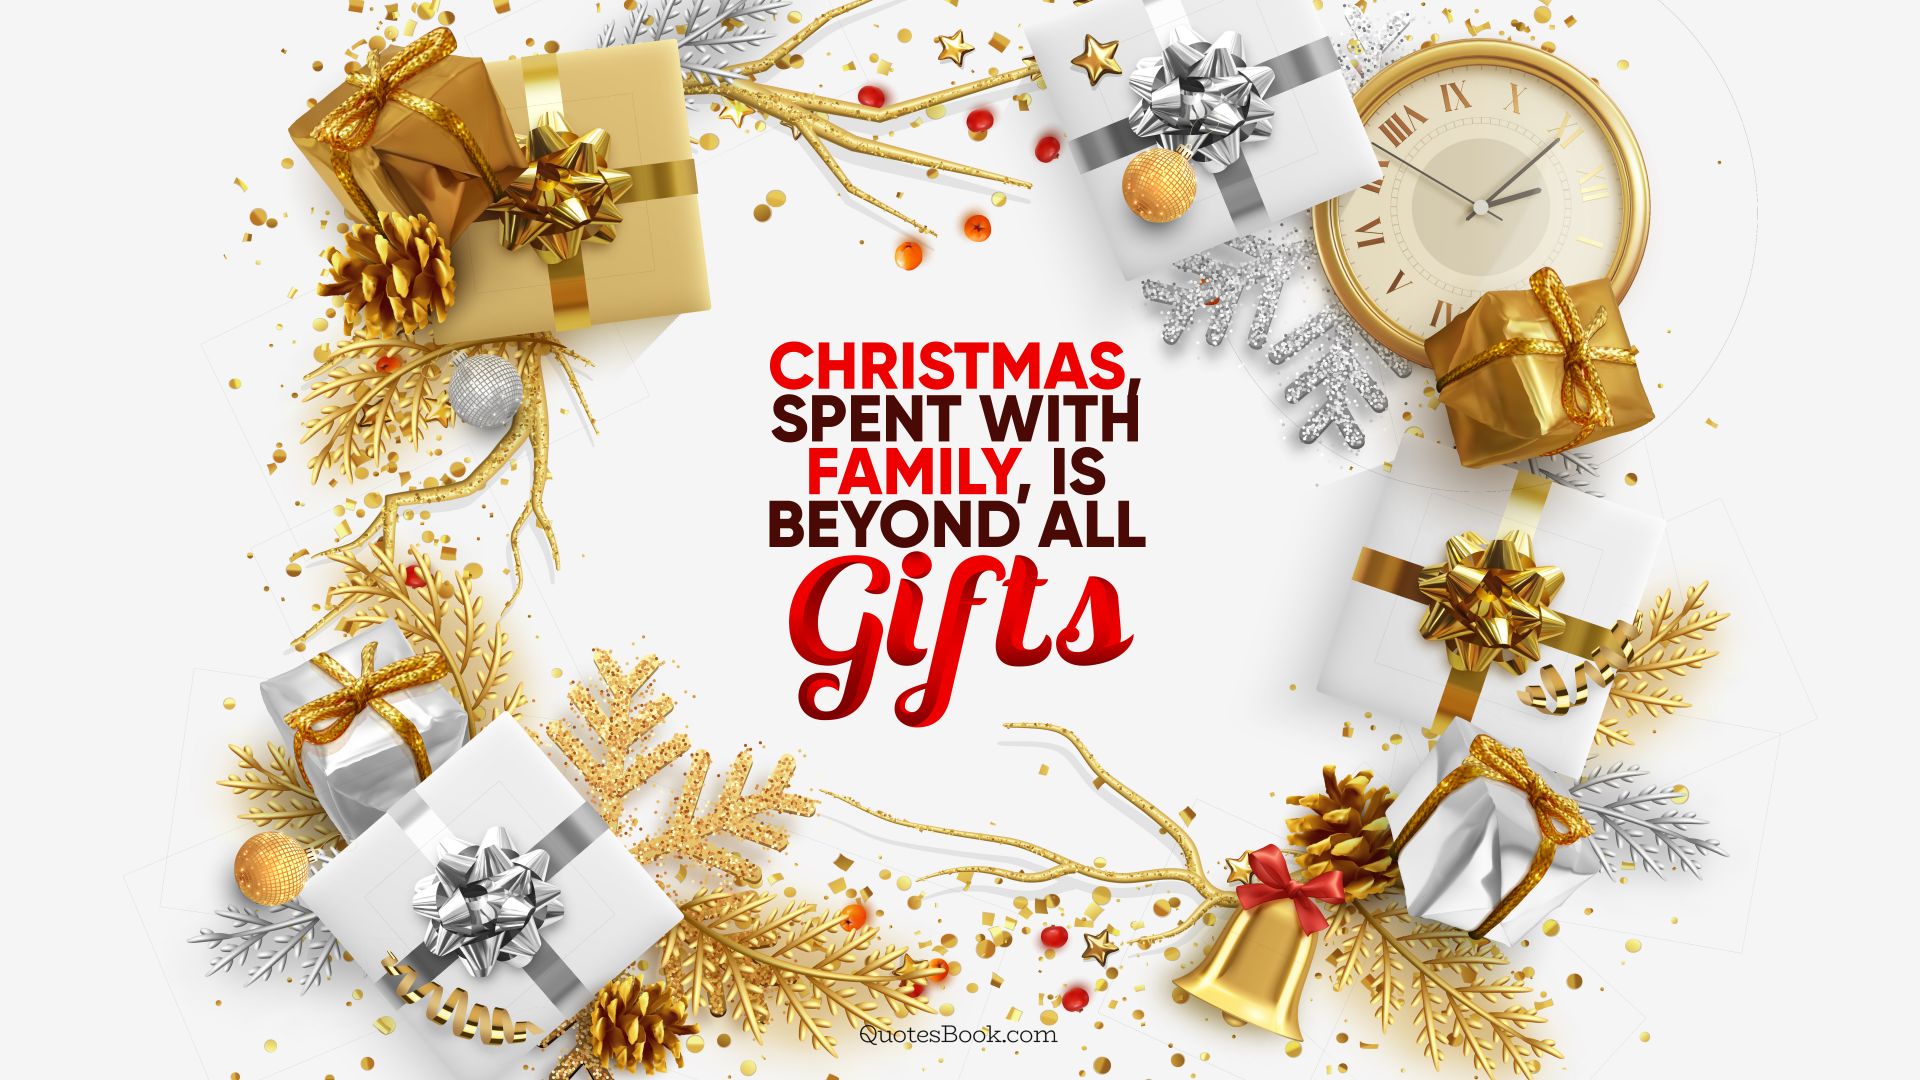 Christmas, spent with family, is beyond all gifts. - Quote by QuotesBook